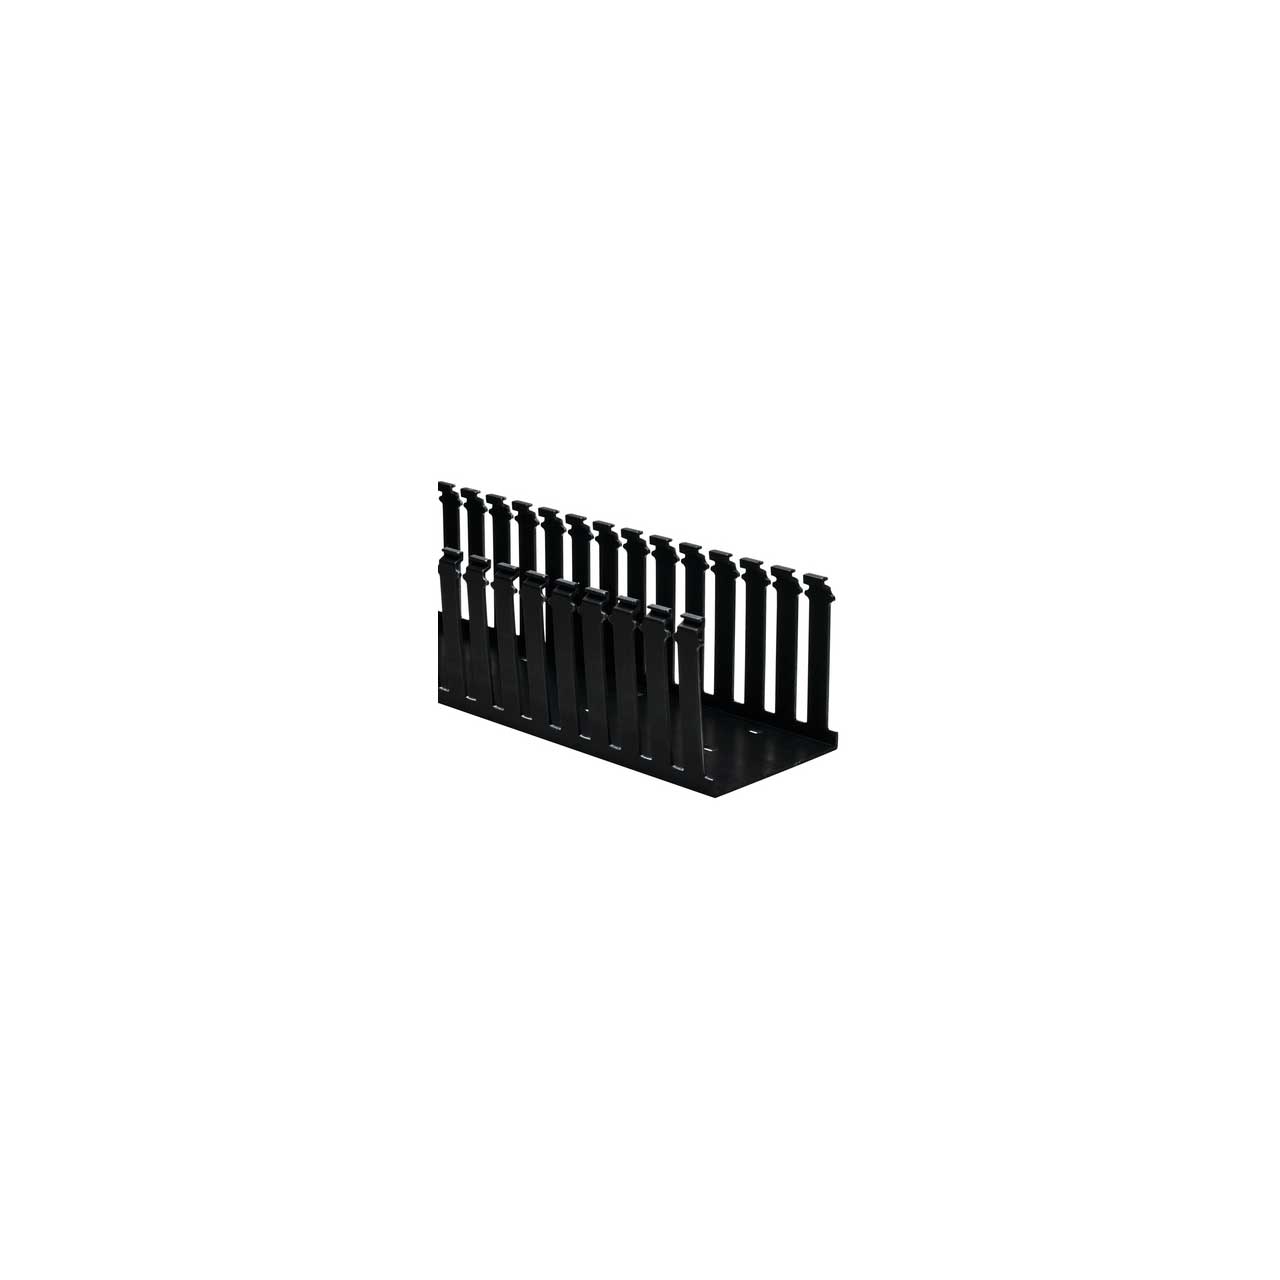 HellermannTyton 181-44020 Non-Adhesive Slotted Wall Duct 4x4-Inch x6 Foot - Black - 20 Pack 181-44020-20